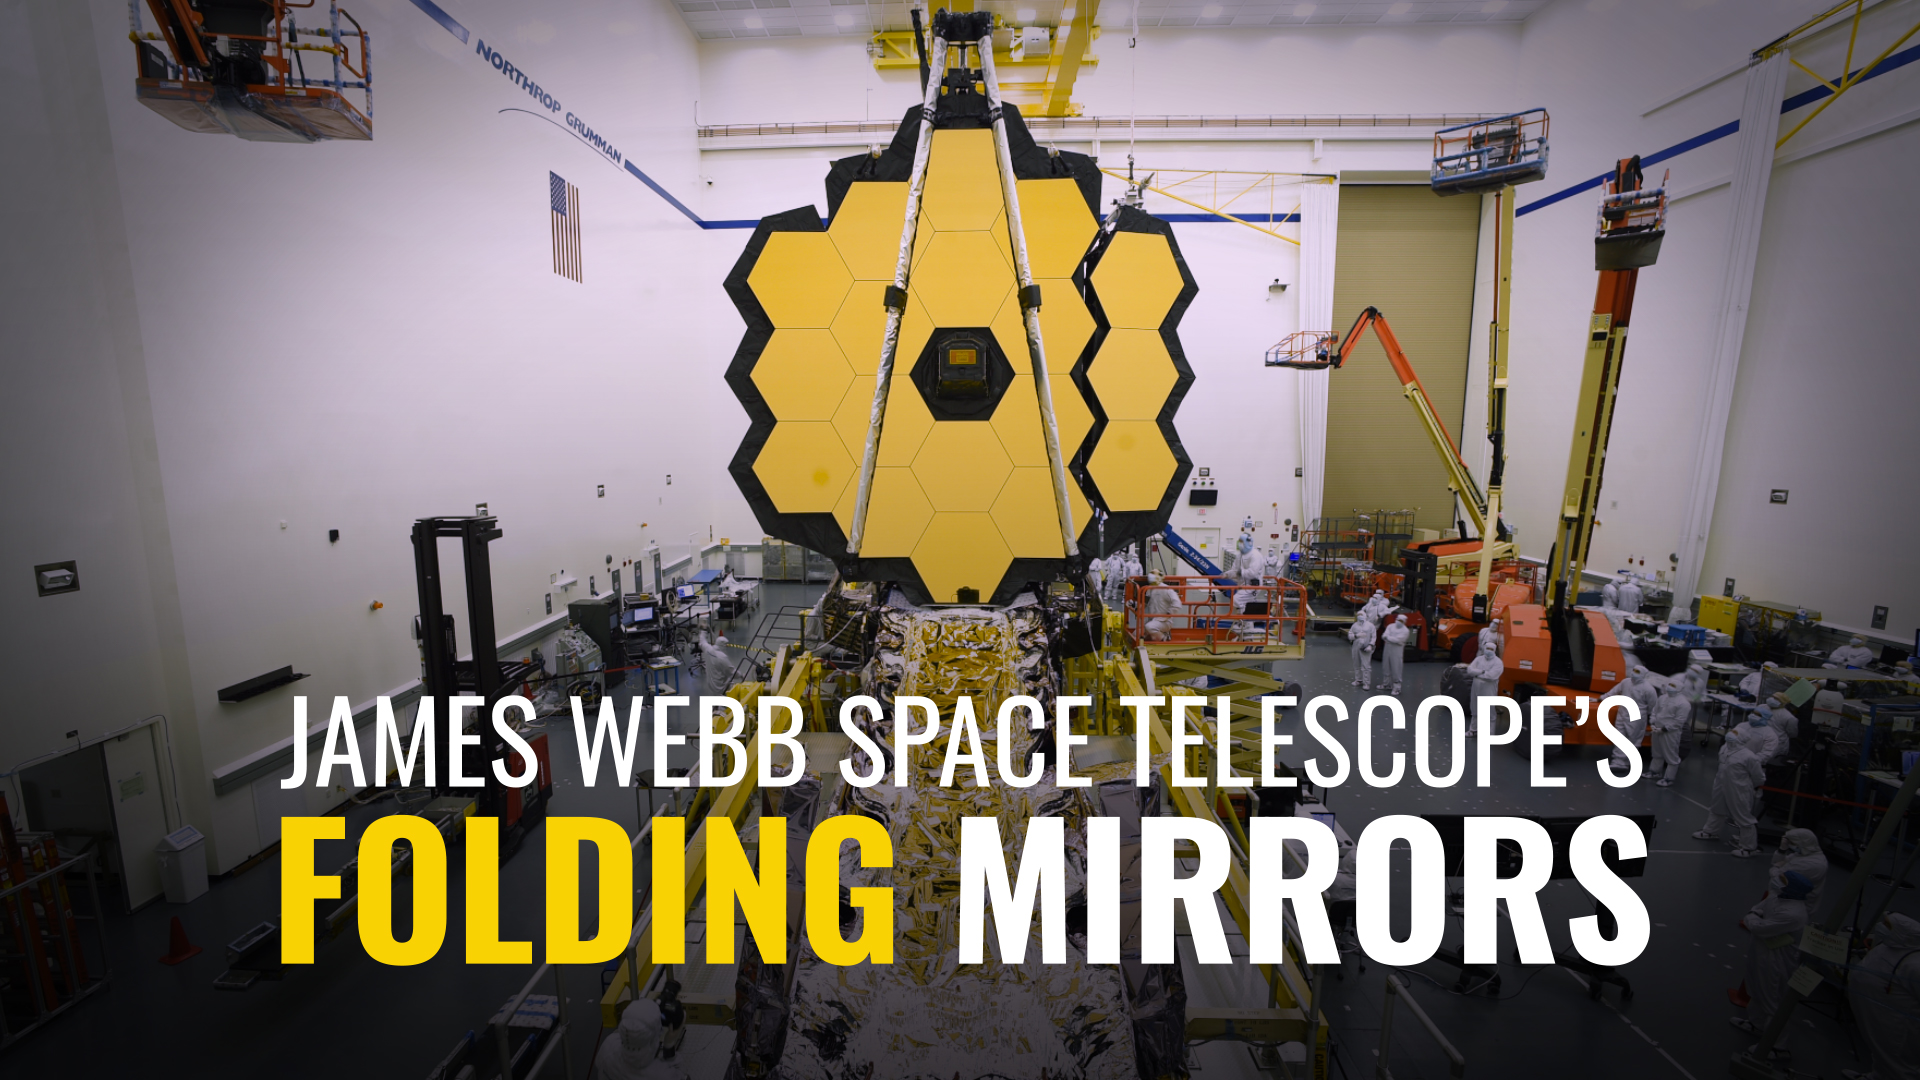 Performed in early March, this most recent test involved commanding the spacecraft's internal systems to fully extend, and latch Webb's iconic 21 feet 4 inch (6.5 meter) primary mirror into the same configuration it will have when in space. Credit: NASA / Sophia Roberts